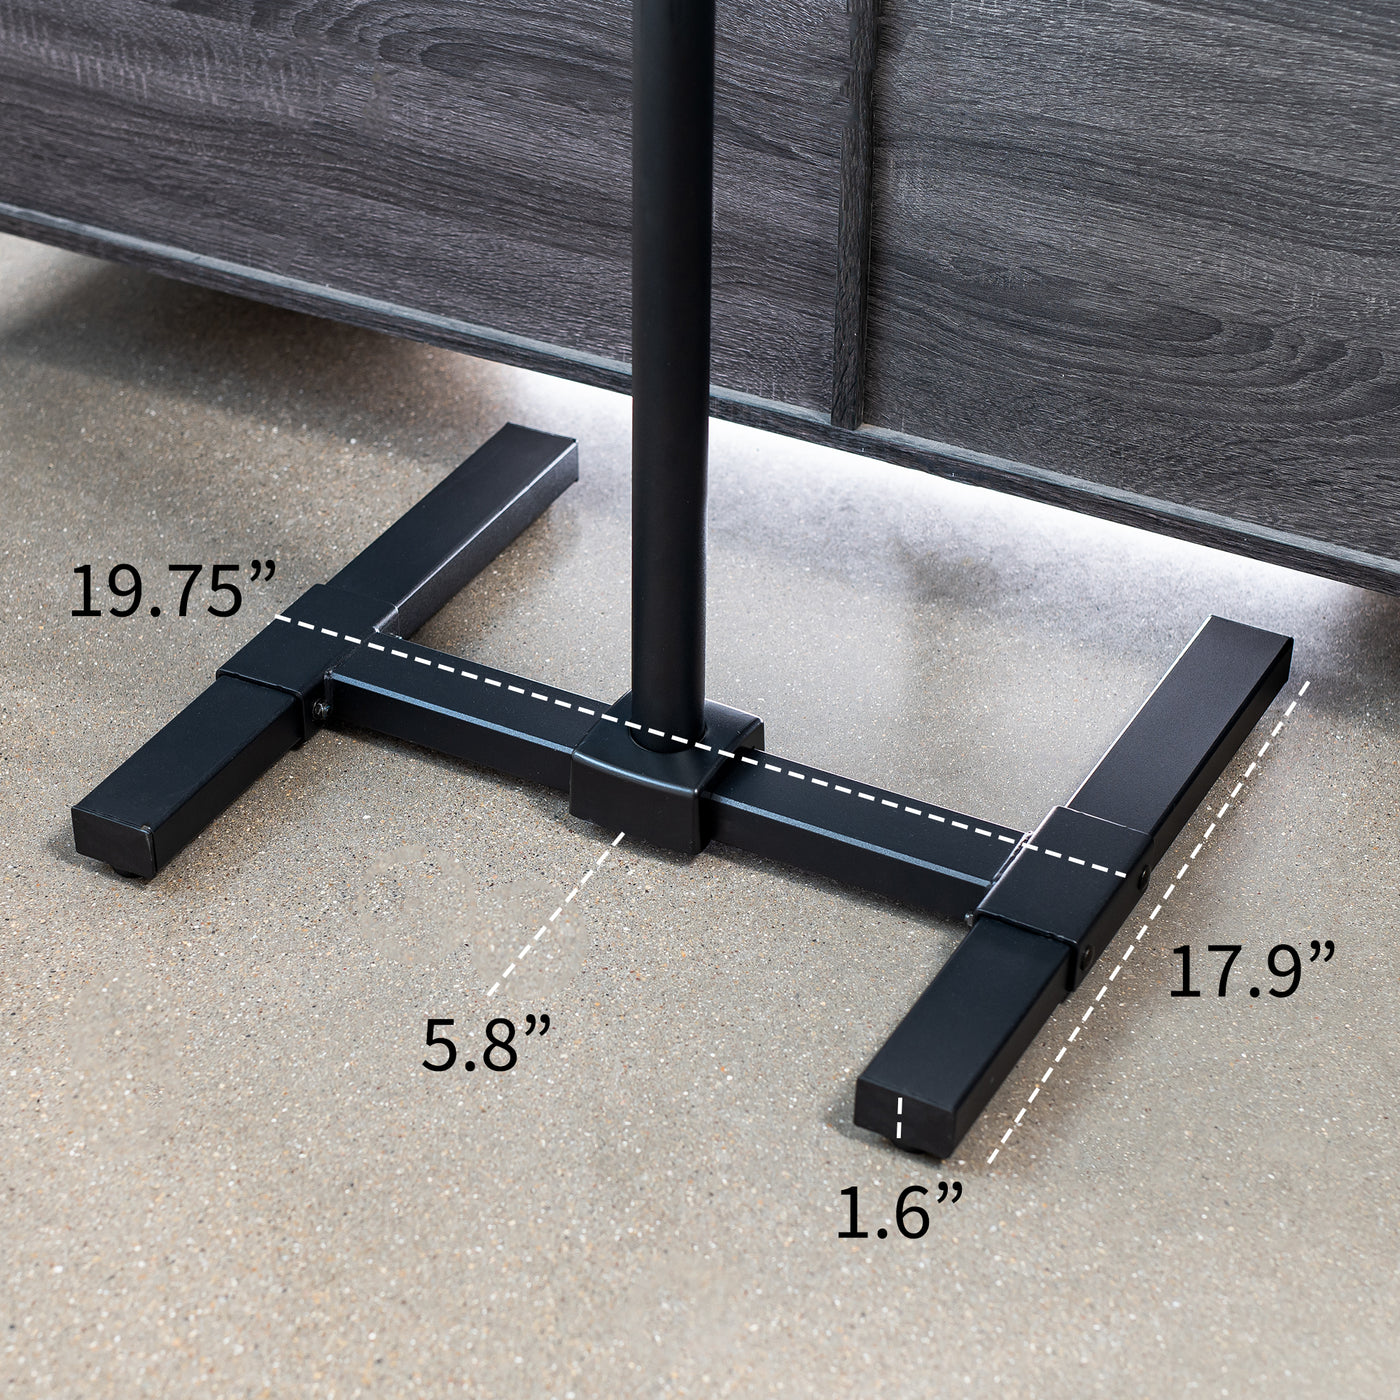 Sturdy height adjustable TV stand with tilt and leveling feet.